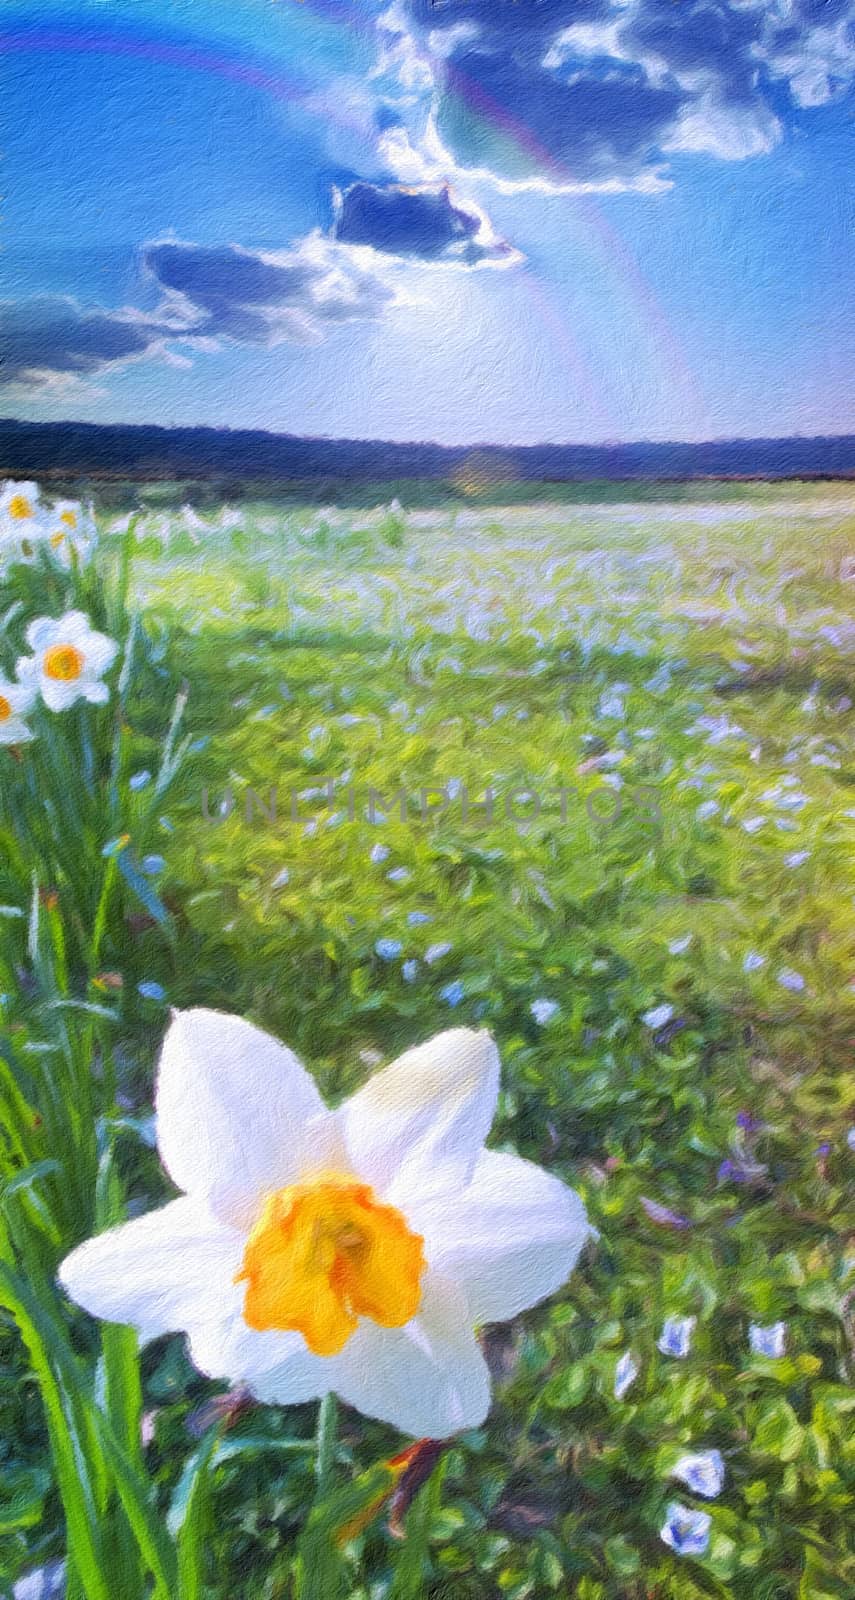 Narcissus field by applesstock